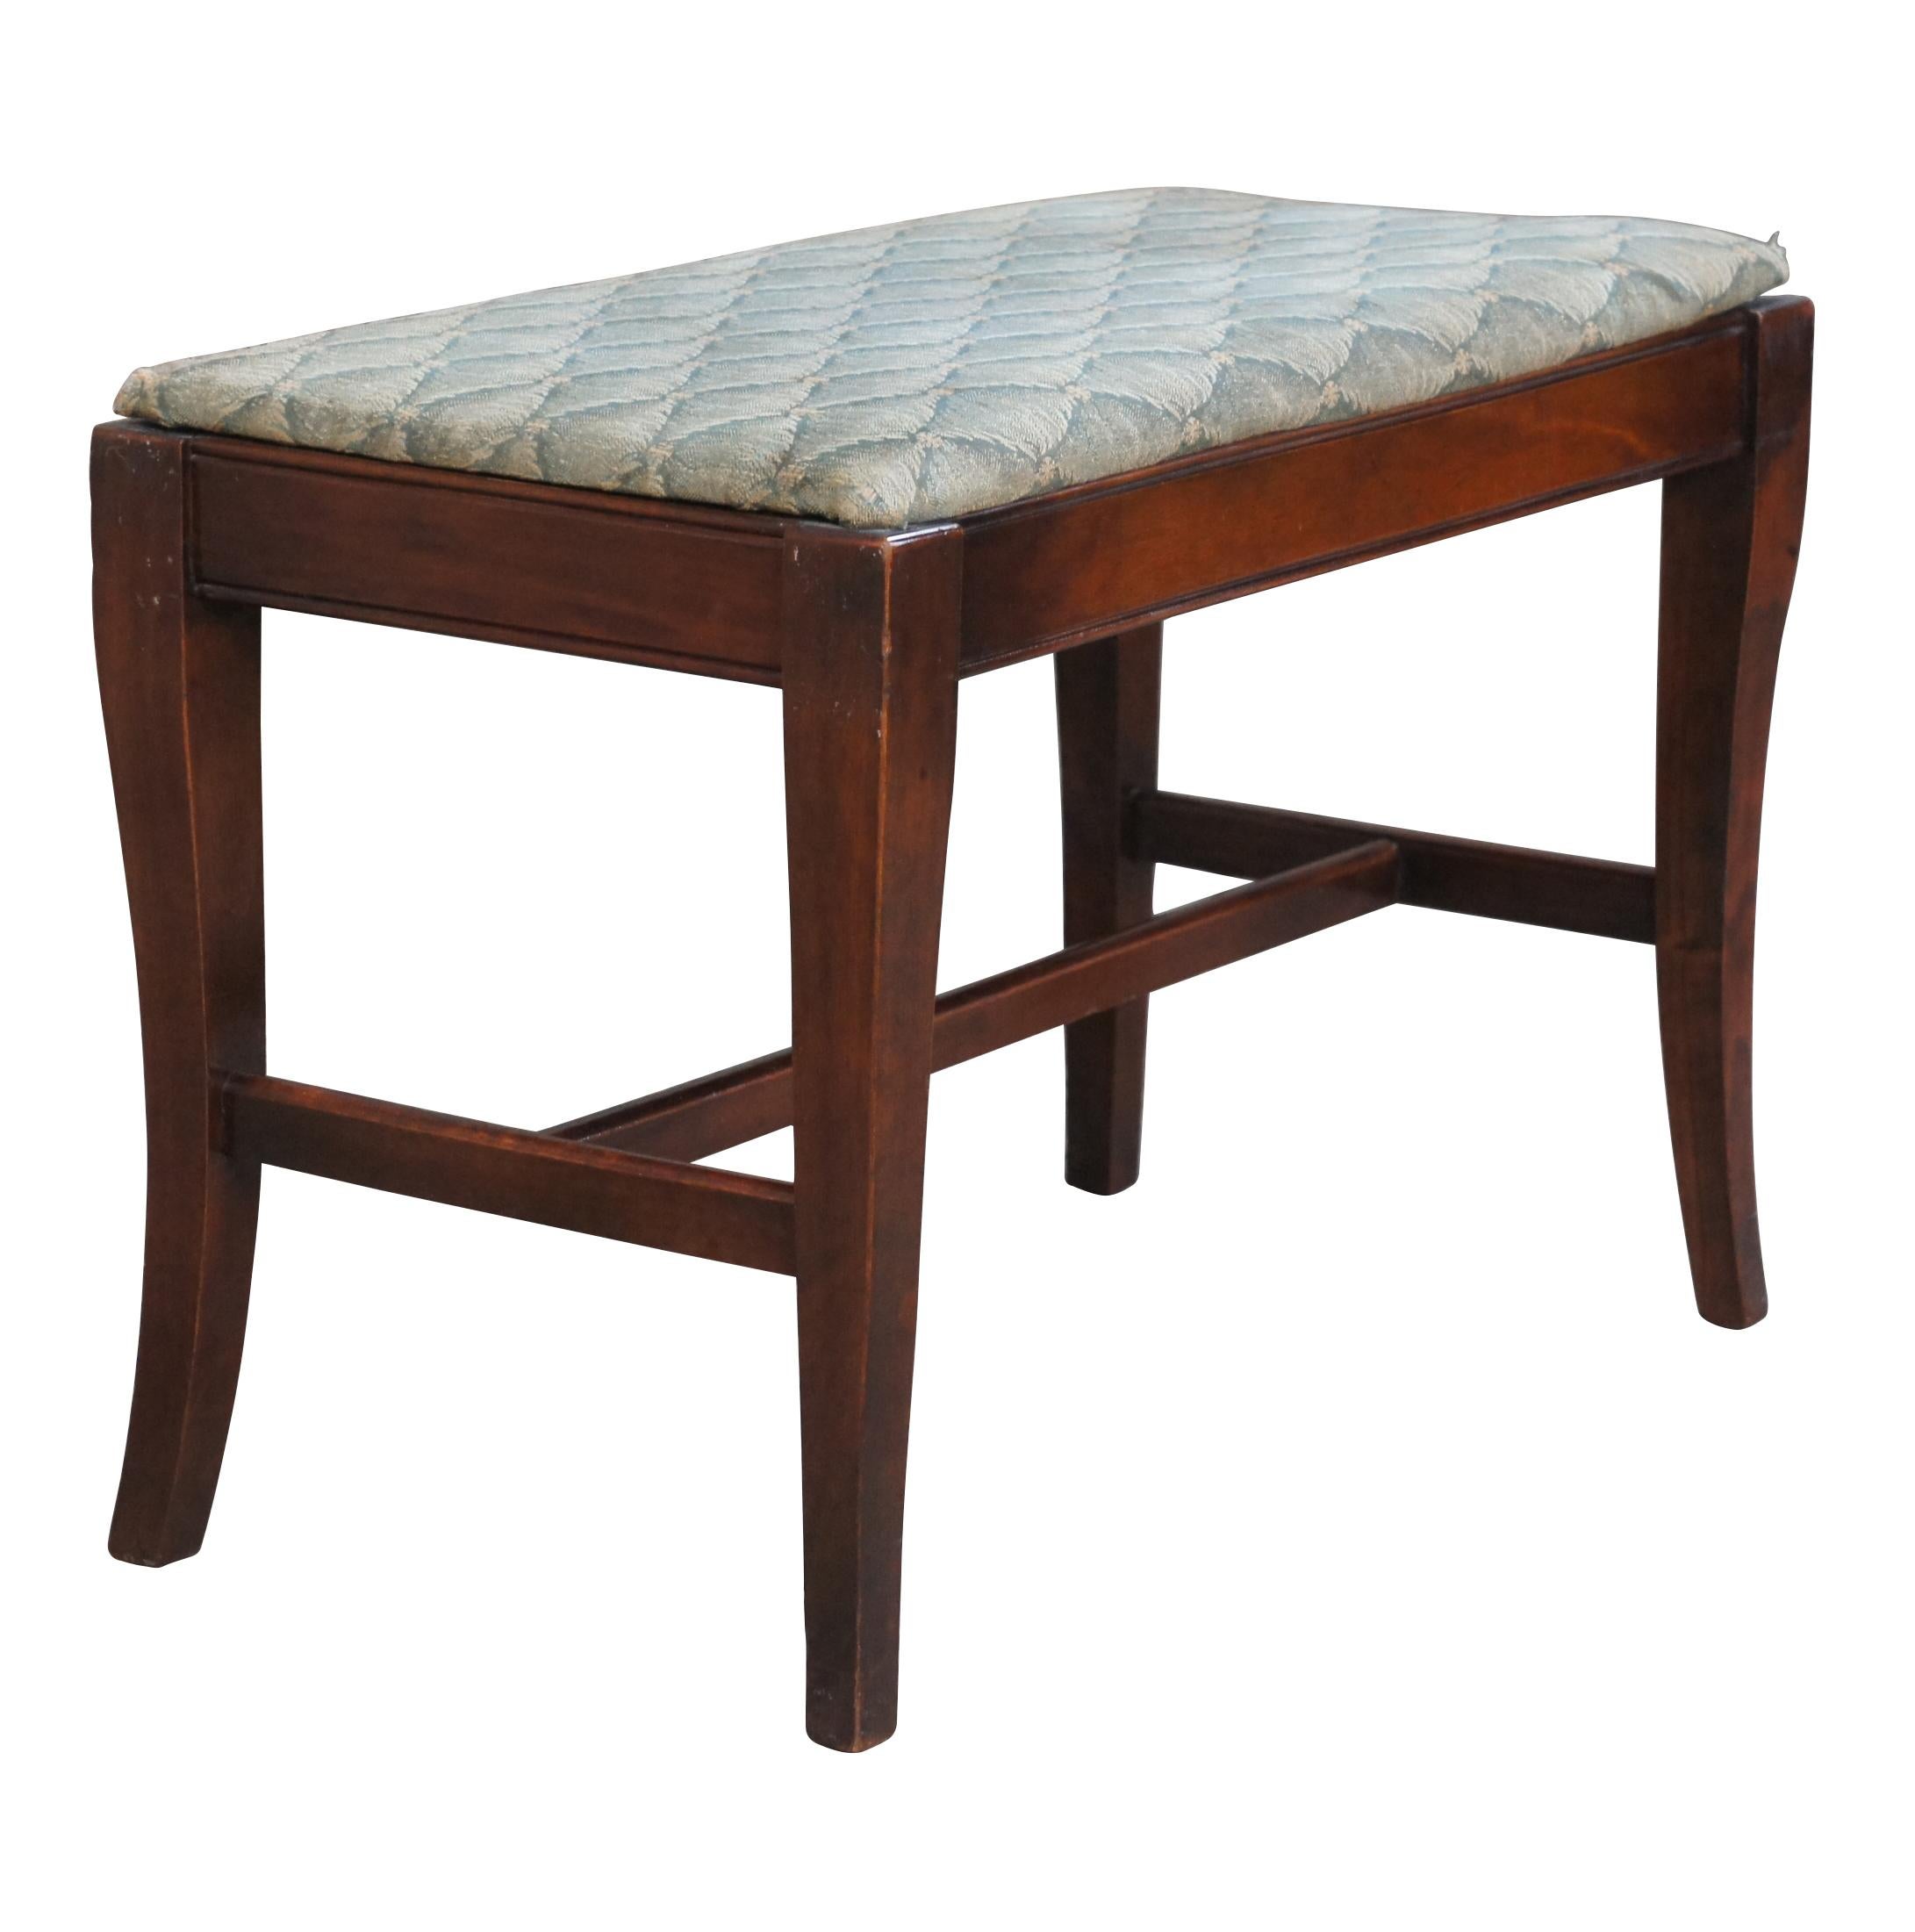 An early 20th century mahogany bench.  Features an upholstered seat and contoured legs connected by an H stretcher.
